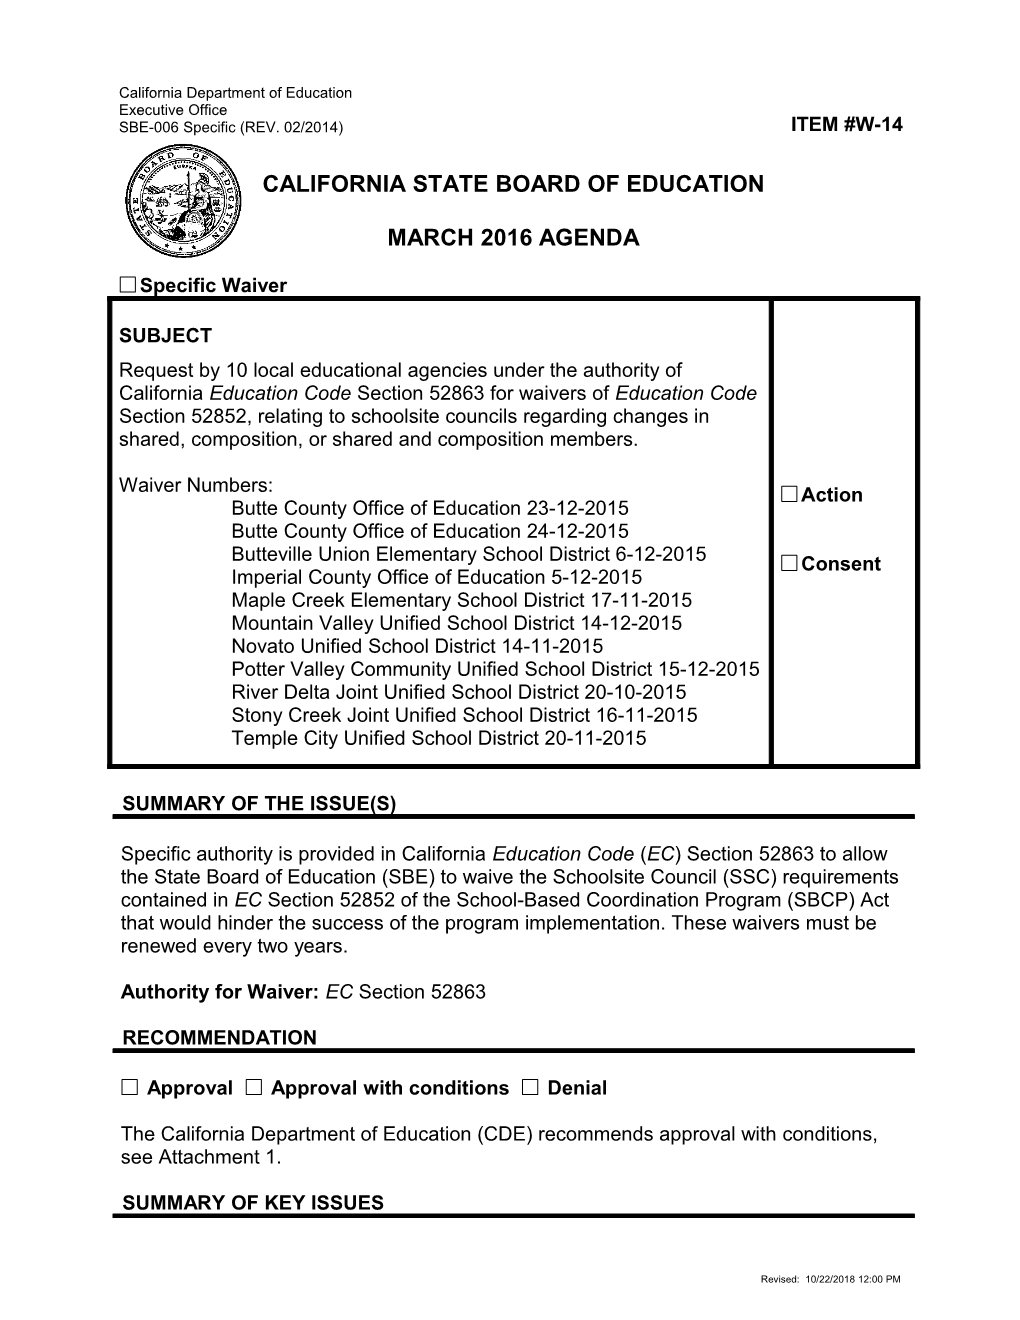 March 2016 Waiver Item W-14 - Meeting Agendas (CA State Board of Education)